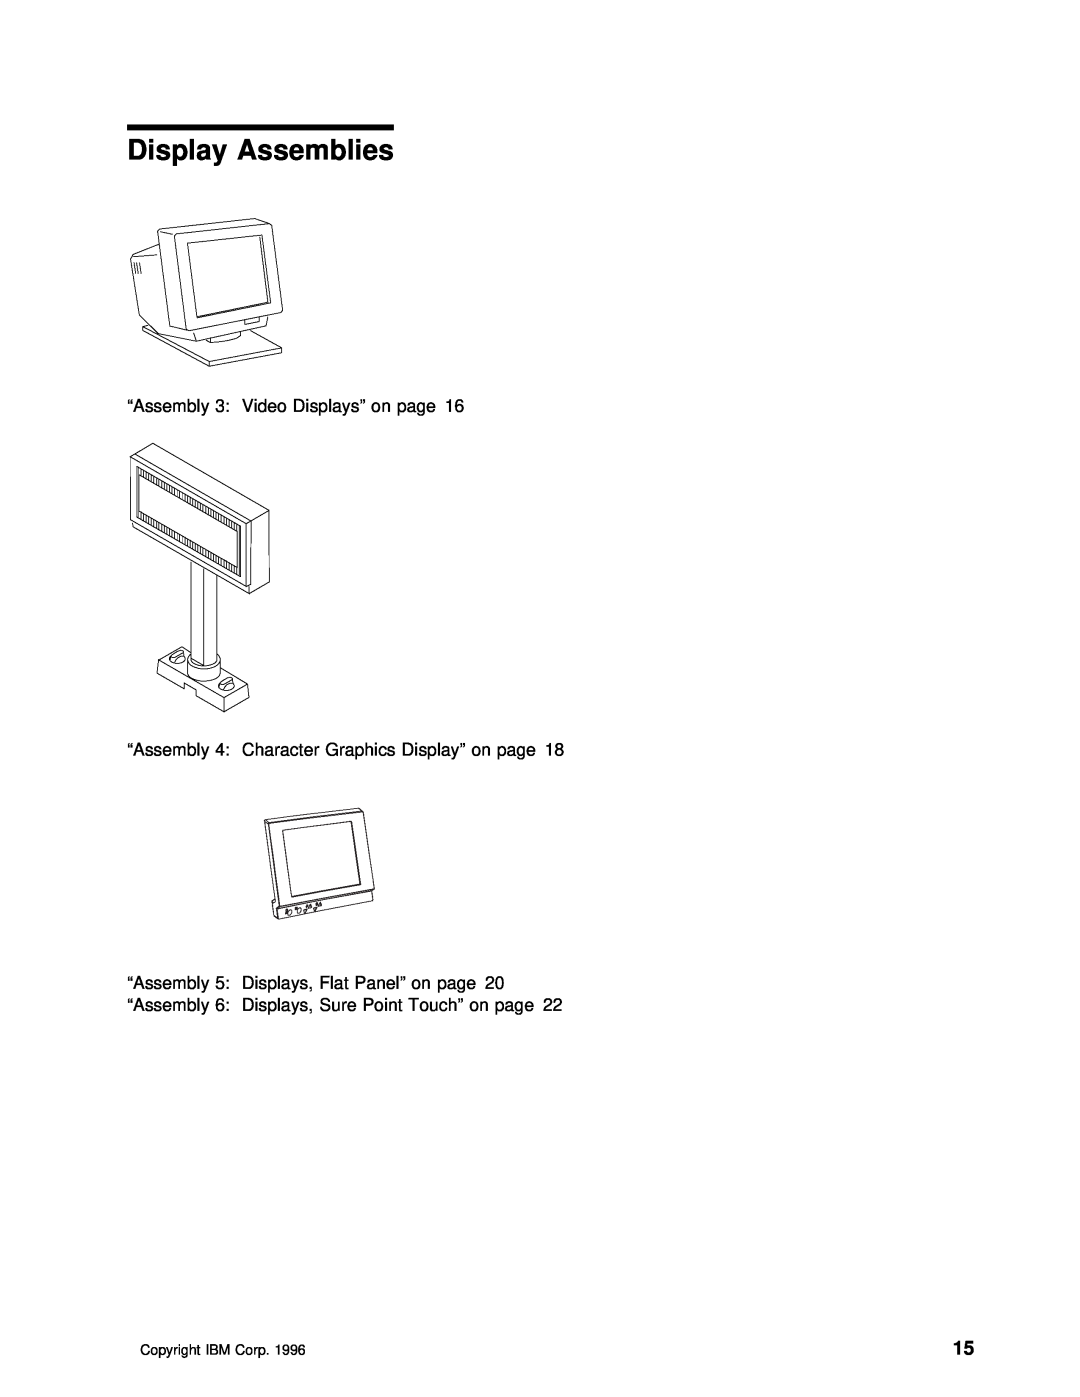 IBM 4694 DBCS FAMILY Display Assemblies, “Assembly 3 Video Displays” on page, “Assembly 5 Displays, Flat Panel” on page 